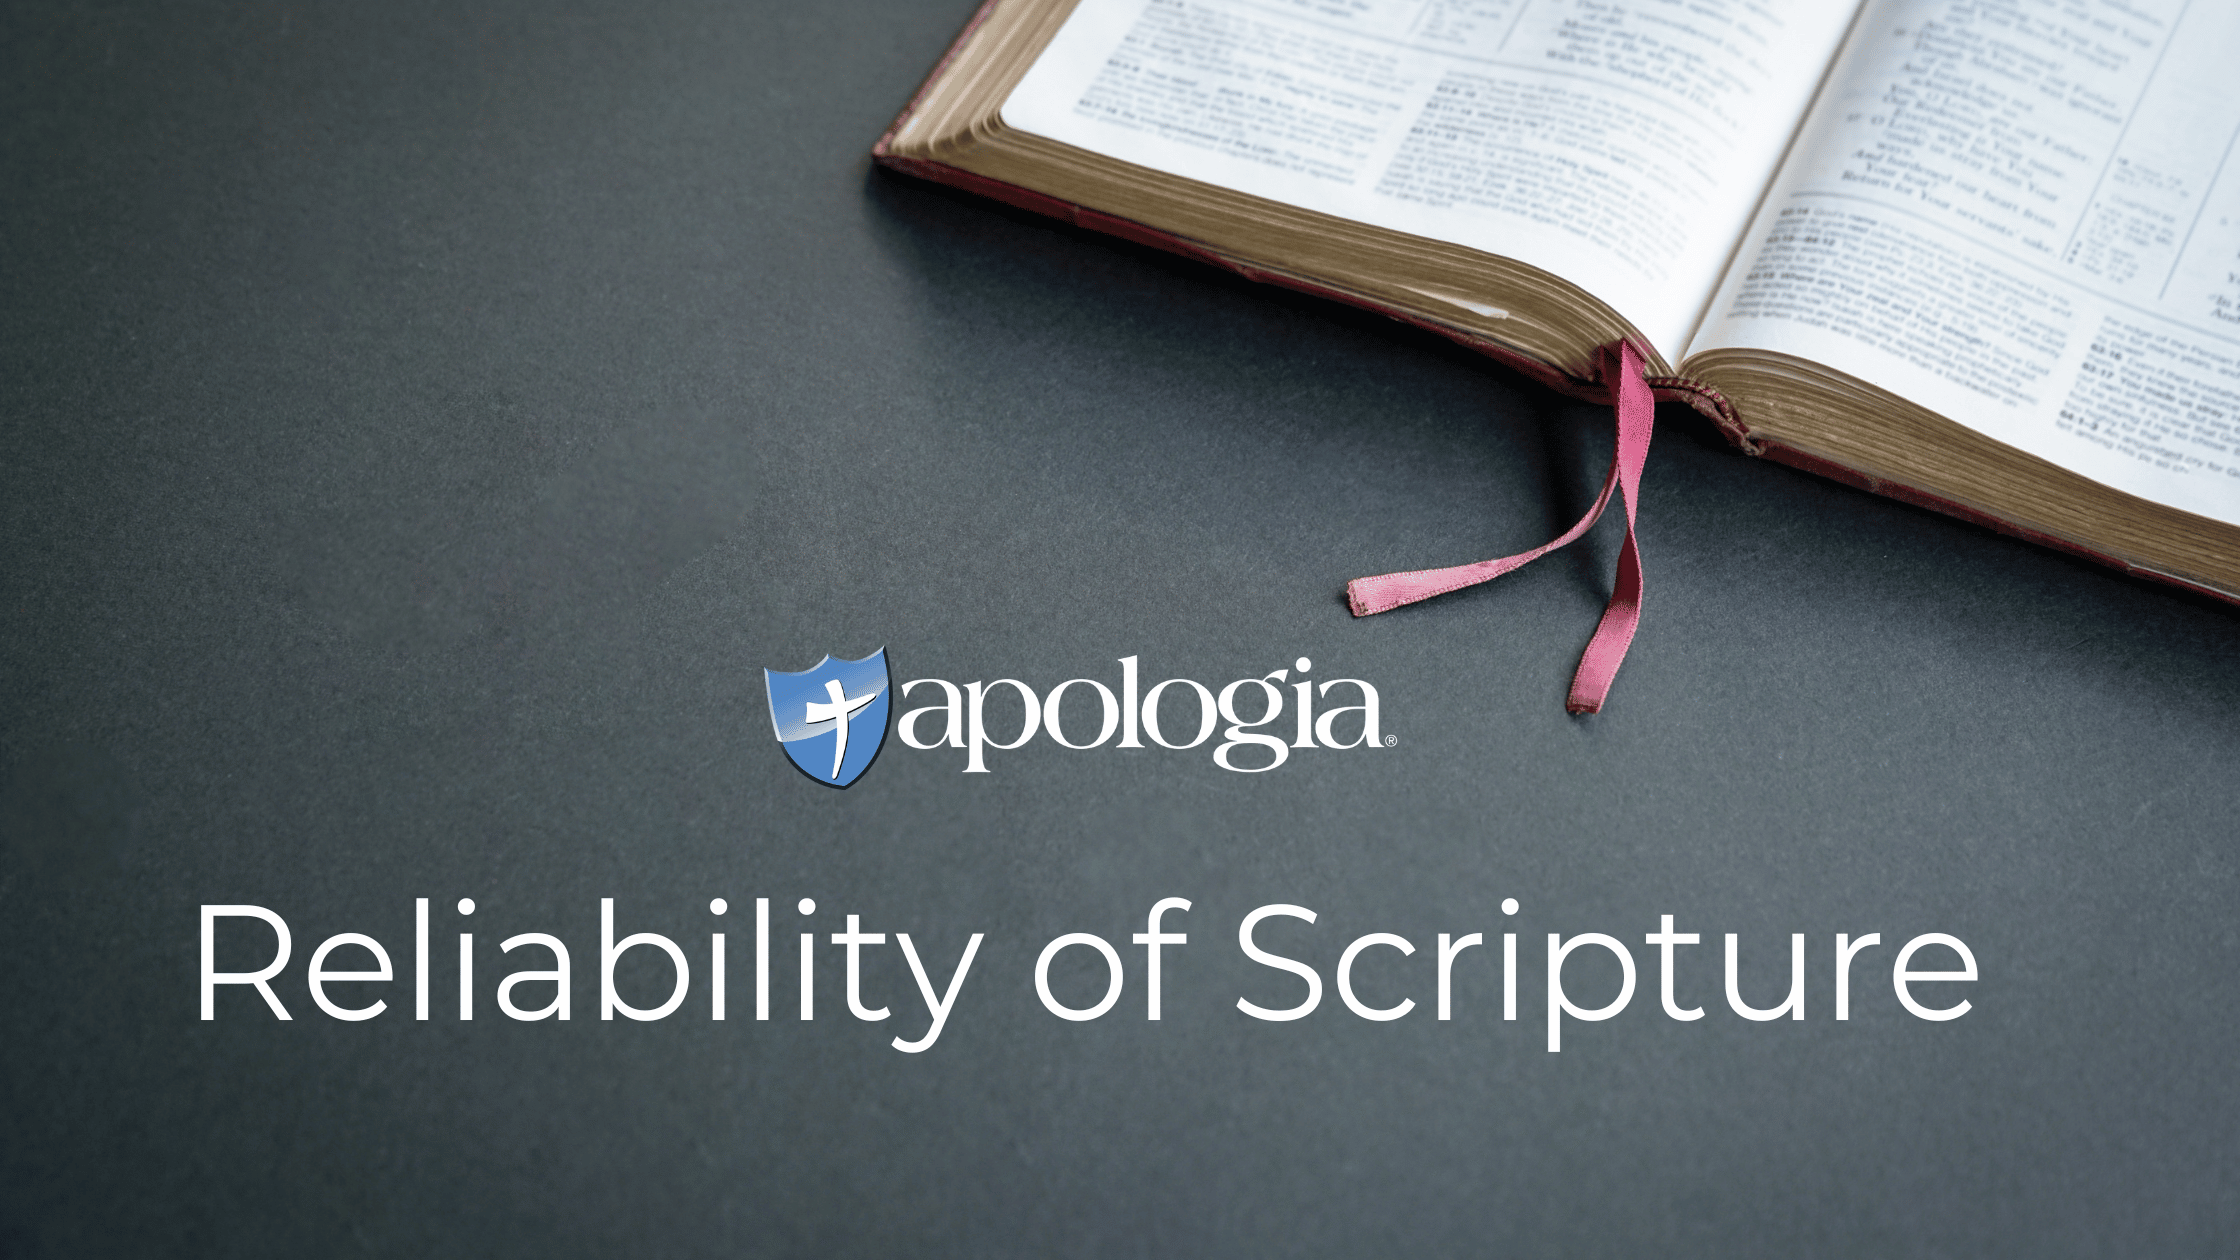 Reliability of Scripture